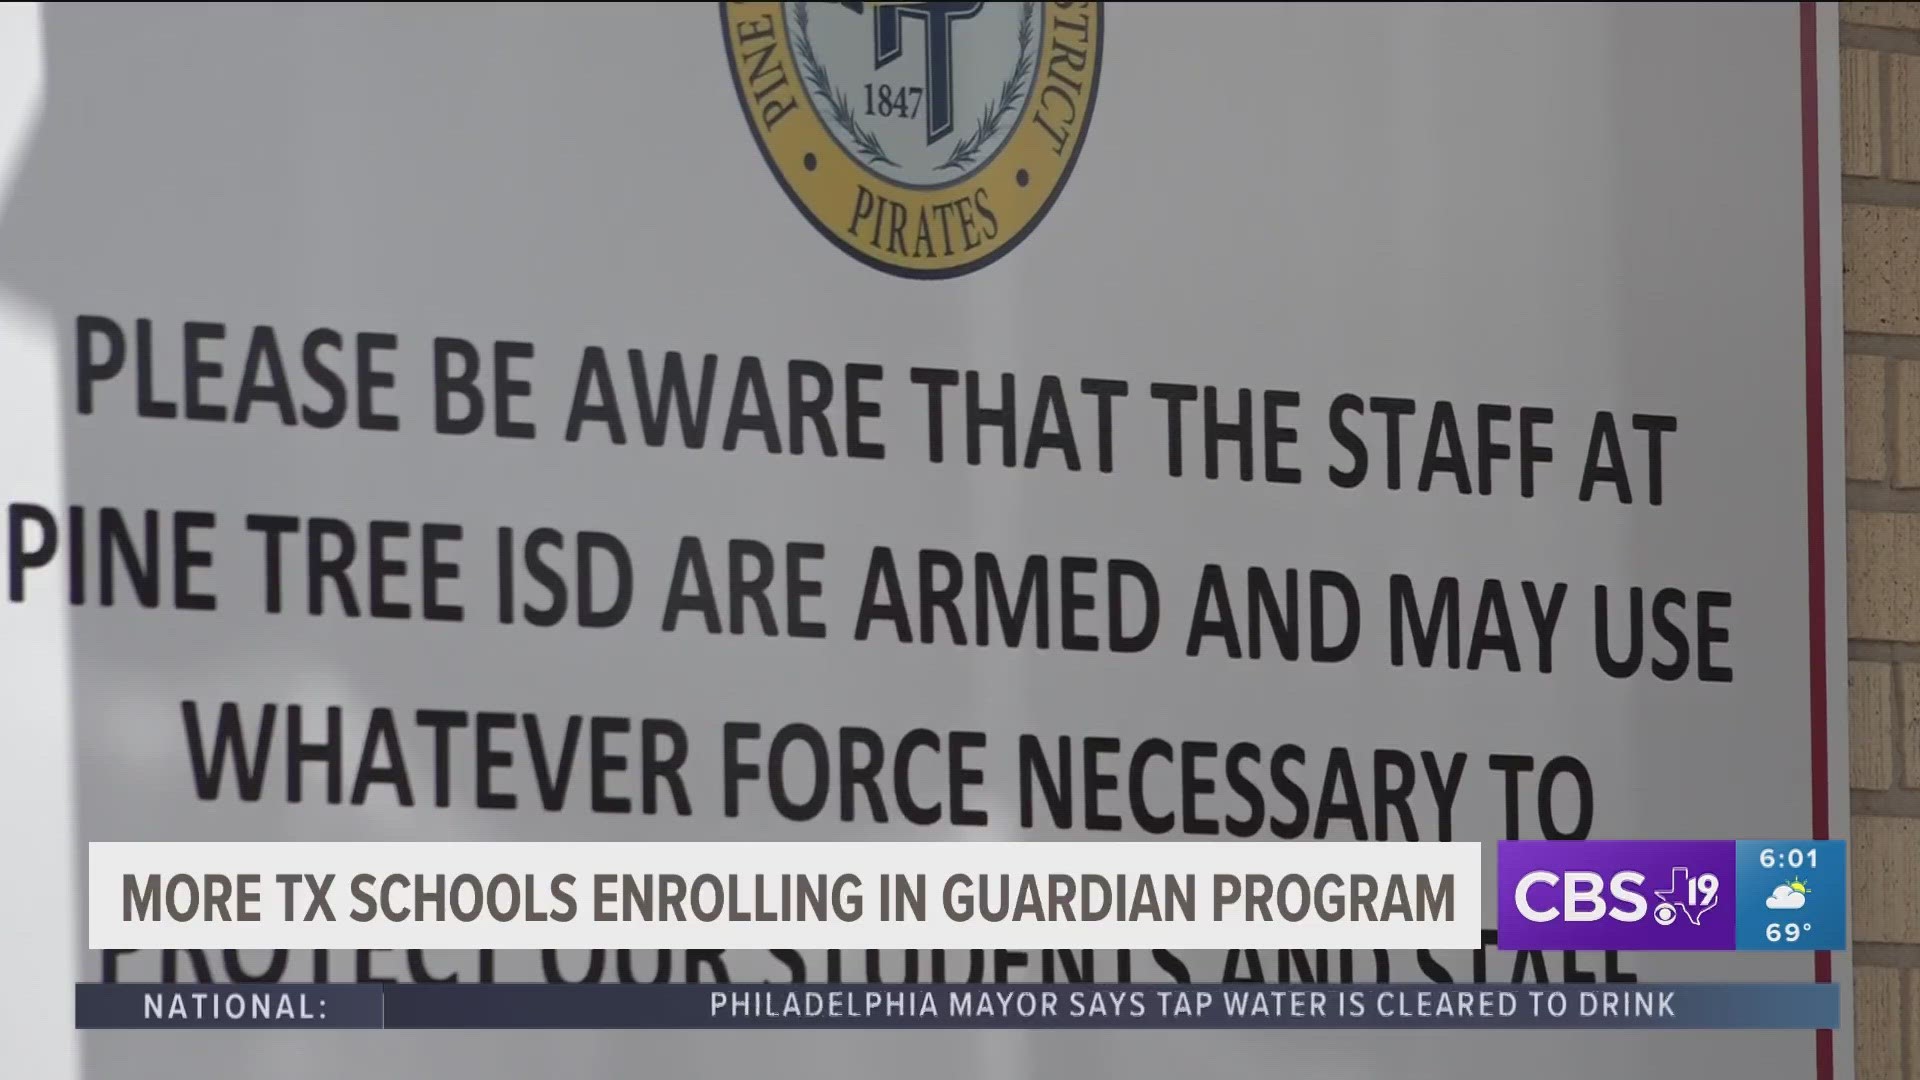 Districts can opt in to adopting the program, allowing for qualified staff to arm themselves and protect their school.